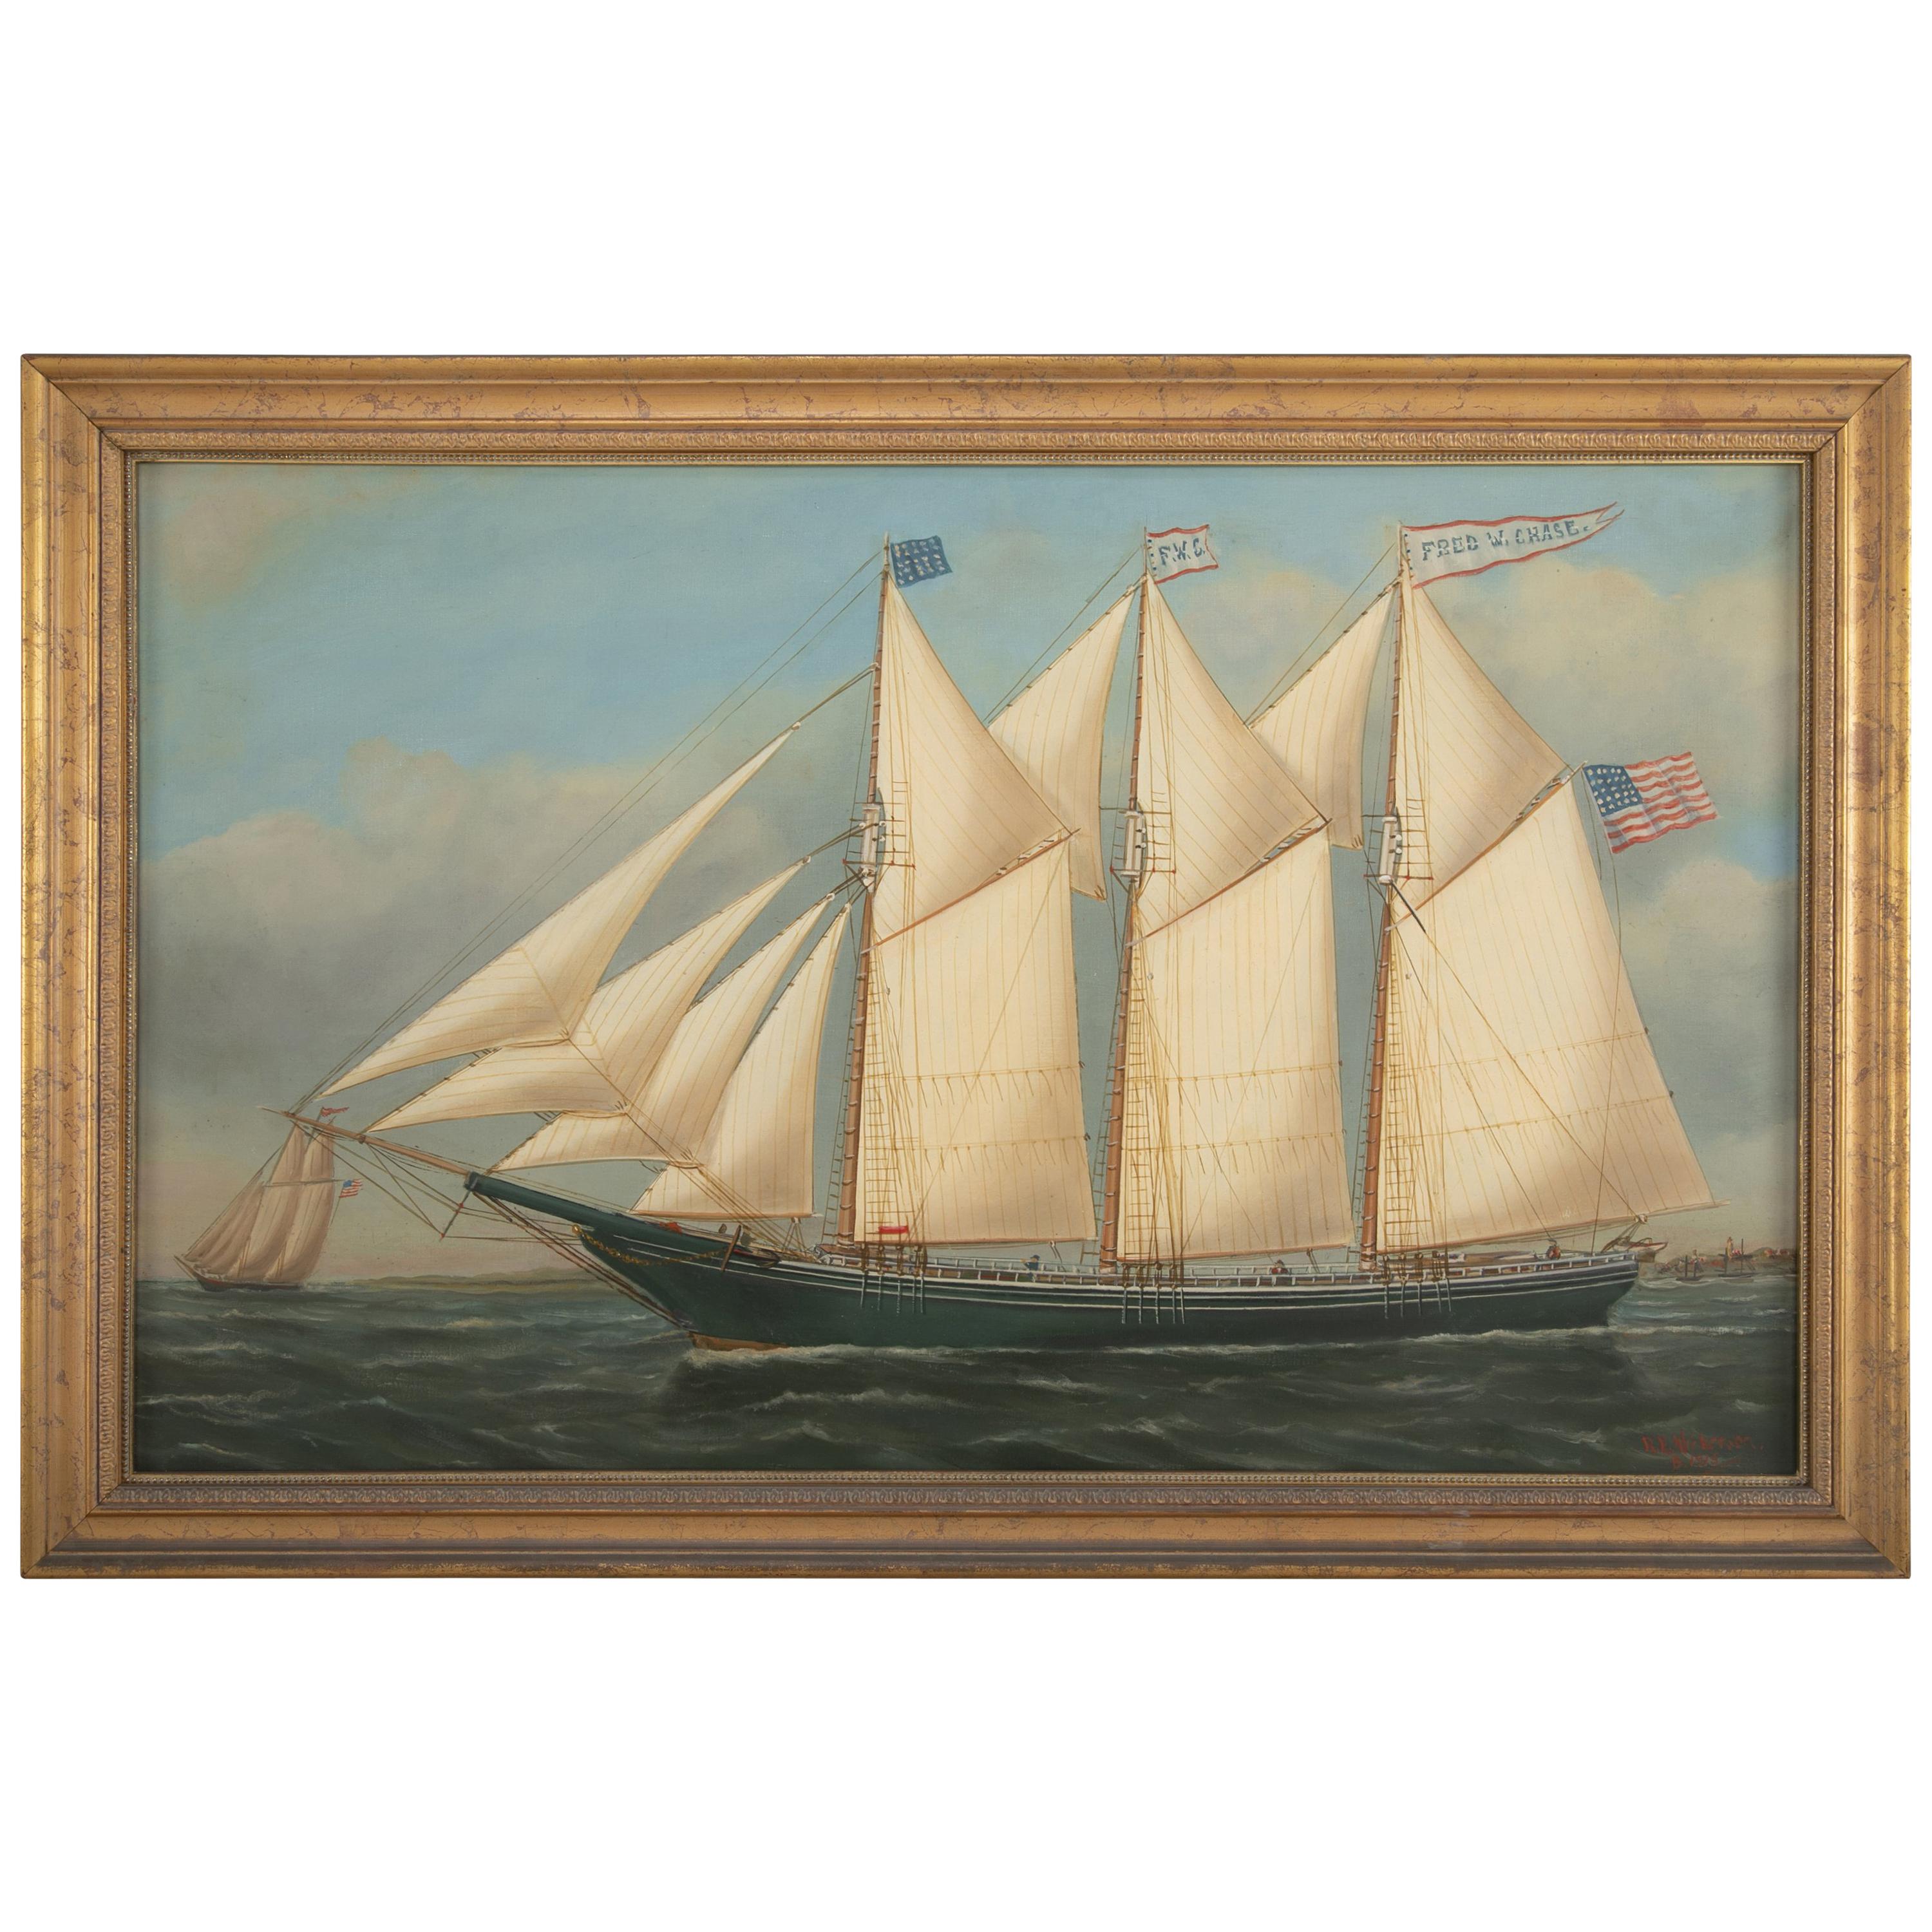 Portrait of the Ship "Fred W. Chase" of Maine For Sale